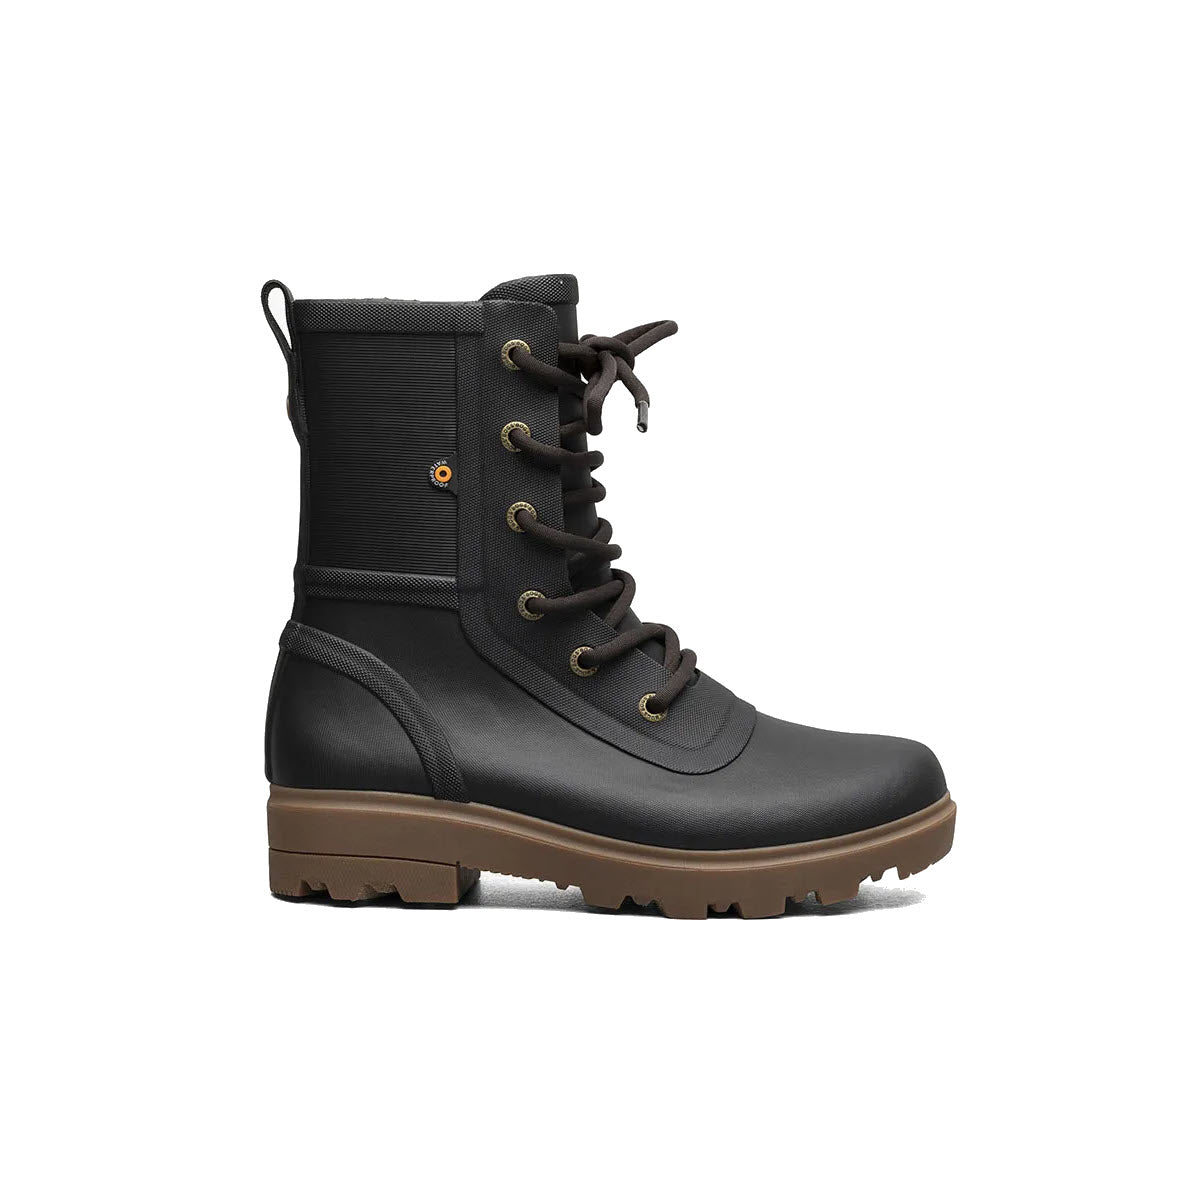 A black lace-up combat boot with metal eyelets and a chunky brown sole, displayed against a plain white background, featuring waterproof Bogs Holly Rain Lace Tall Black boots.